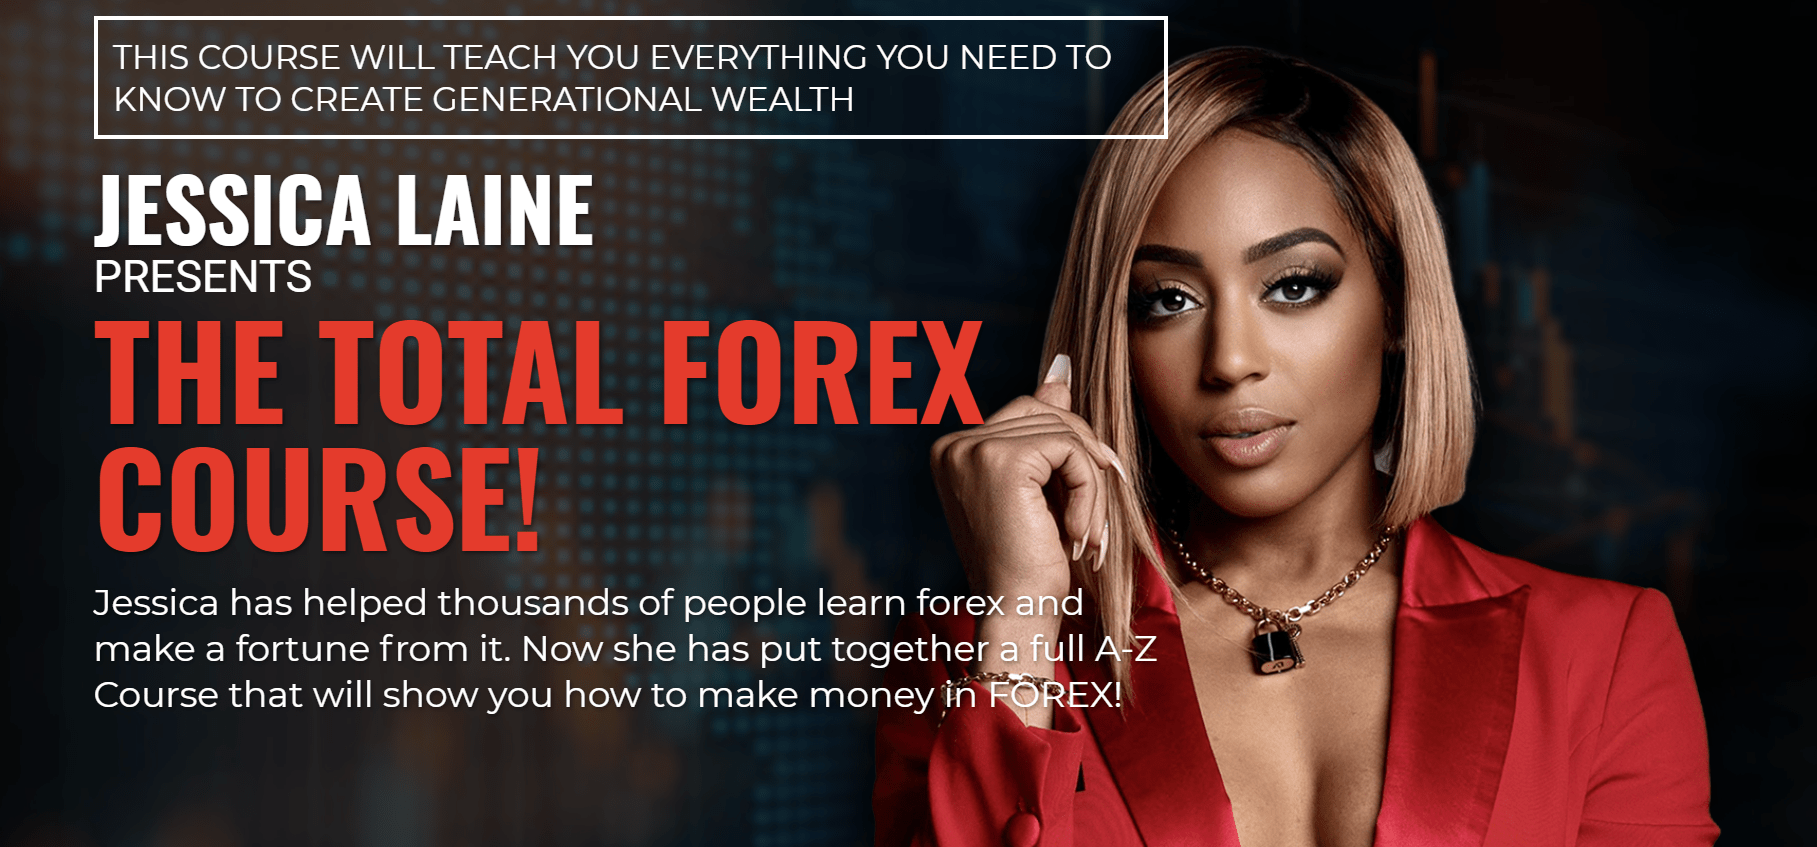 Jess Invest Total Forex Course EYL - Jessica Laine